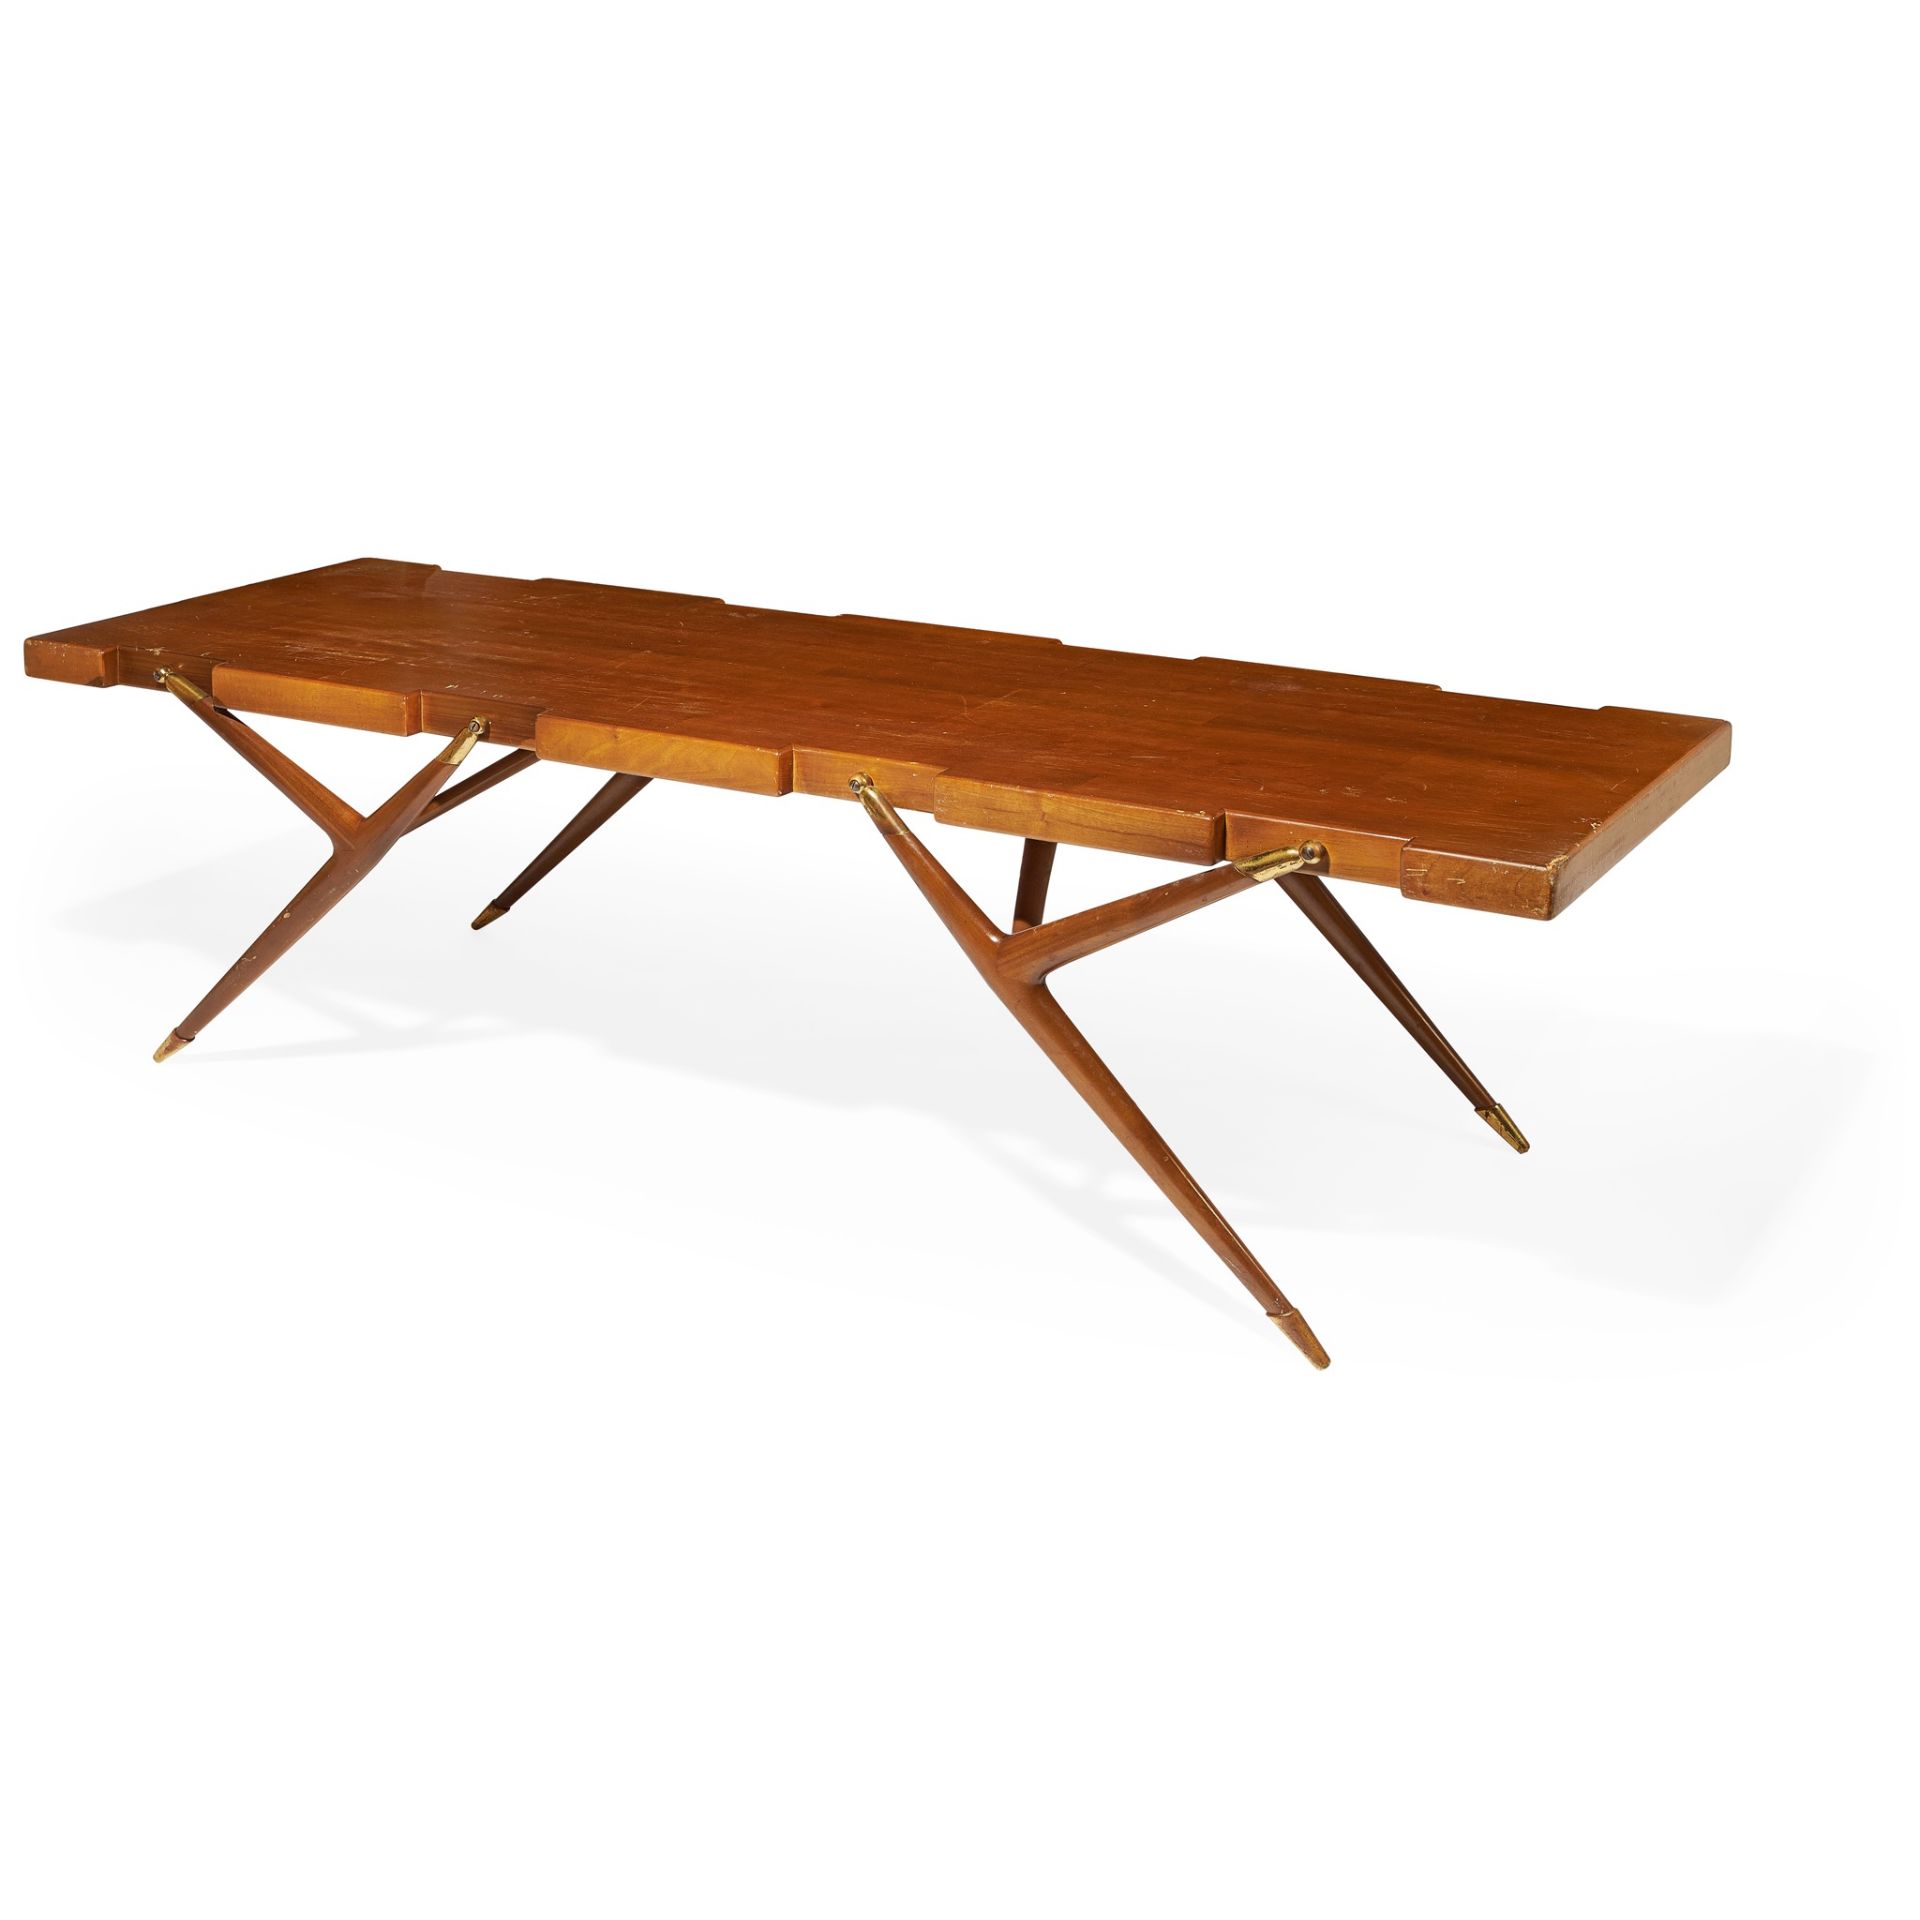 ICO PARISI (ITALIAN 1916-1996) FOR SINGER & SONS LOW TABLE, DESIGNED 1951